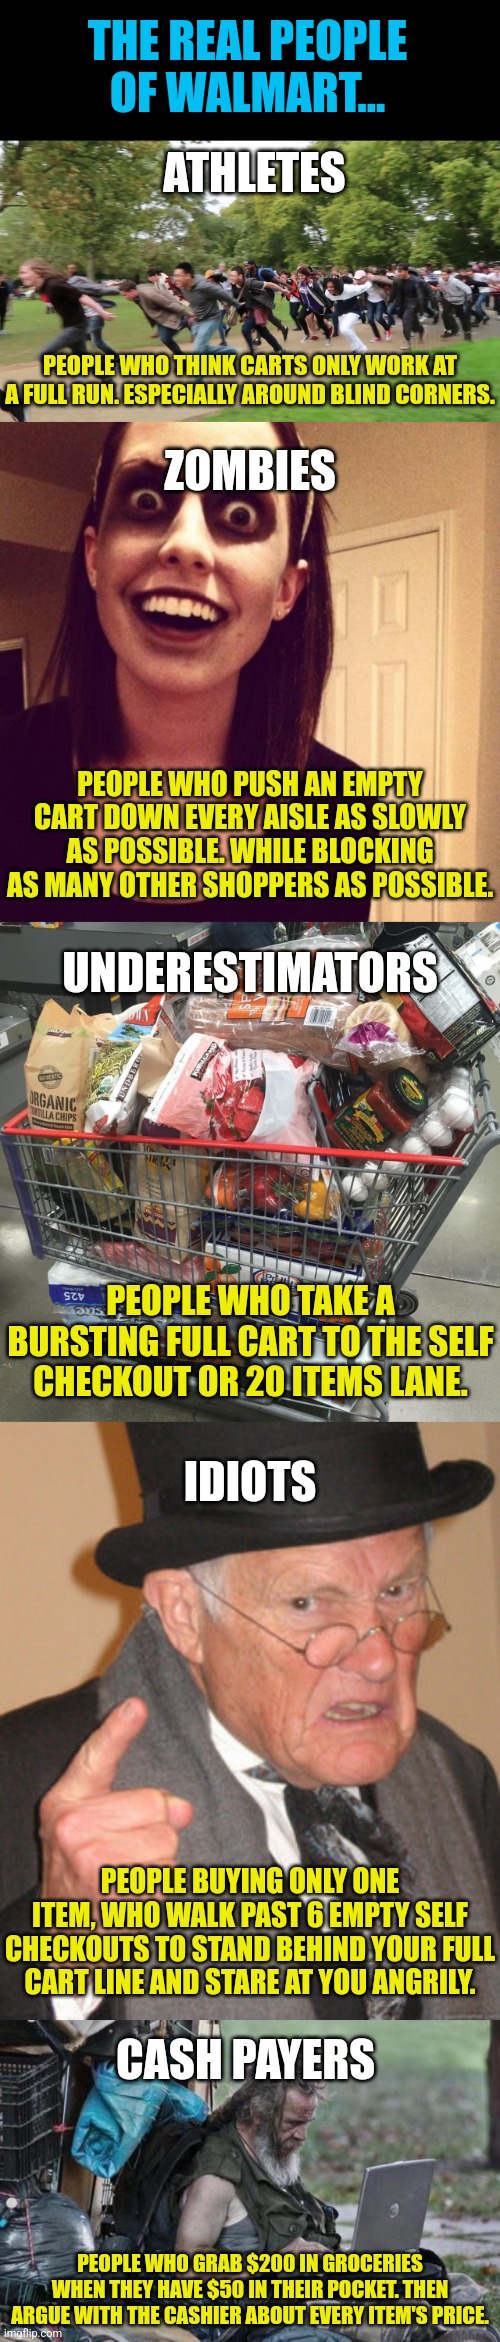 Which person of Walmart are you? | THE REAL PEOPLE OF WALMART... ATHLETES; PEOPLE WHO THINK CARTS ONLY WORK AT A FULL RUN. ESPECIALLY AROUND BLIND CORNERS. ZOMBIES; PEOPLE WHO PUSH AN EMPTY CART DOWN EVERY AISLE AS SLOWLY AS POSSIBLE. WHILE BLOCKING AS MANY OTHER SHOPPERS AS POSSIBLE. UNDERESTIMATORS; PEOPLE WHO TAKE A BURSTING FULL CART TO THE SELF CHECKOUT OR 20 ITEMS LANE. IDIOTS; PEOPLE BUYING ONLY ONE ITEM, WHO WALK PAST 6 EMPTY SELF CHECKOUTS TO STAND BEHIND YOUR FULL CART LINE AND STARE AT YOU ANGRILY. CASH PAYERS; PEOPLE WHO GRAB $200 IN GROCERIES WHEN THEY HAVE $50 IN THEIR POCKET. THEN ARGUE WITH THE CASHIER ABOUT EVERY ITEM'S PRICE. | image tagged in shopping cart,welcome to walmart,people | made w/ Imgflip meme maker